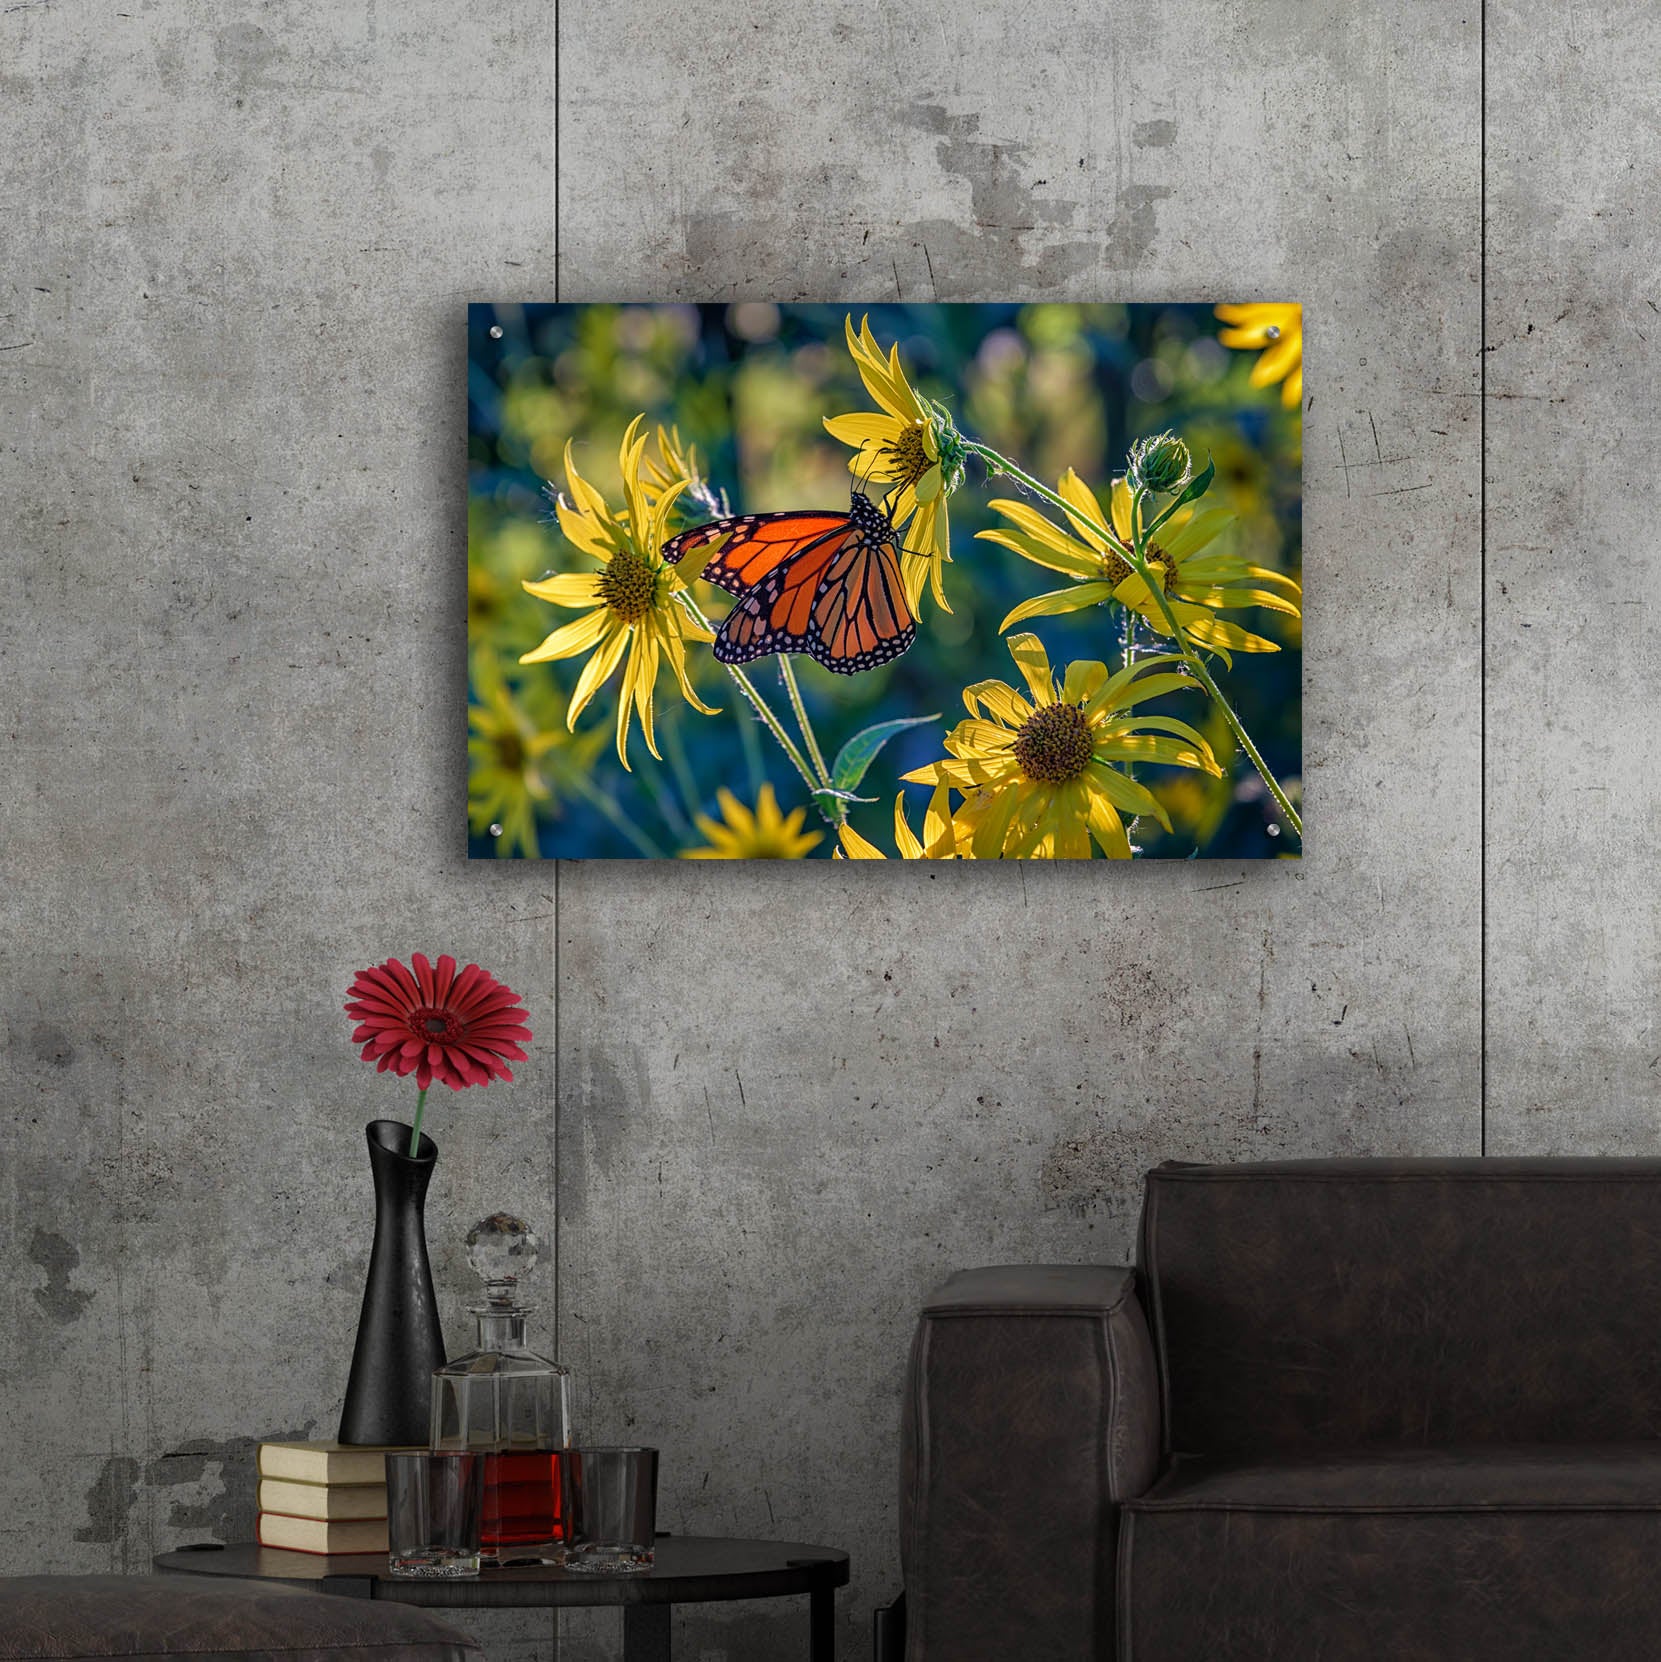 Epic Art 'The Monarch and the Sunflower' by Rick Berk, Acrylic Glass Wall Art,36x24